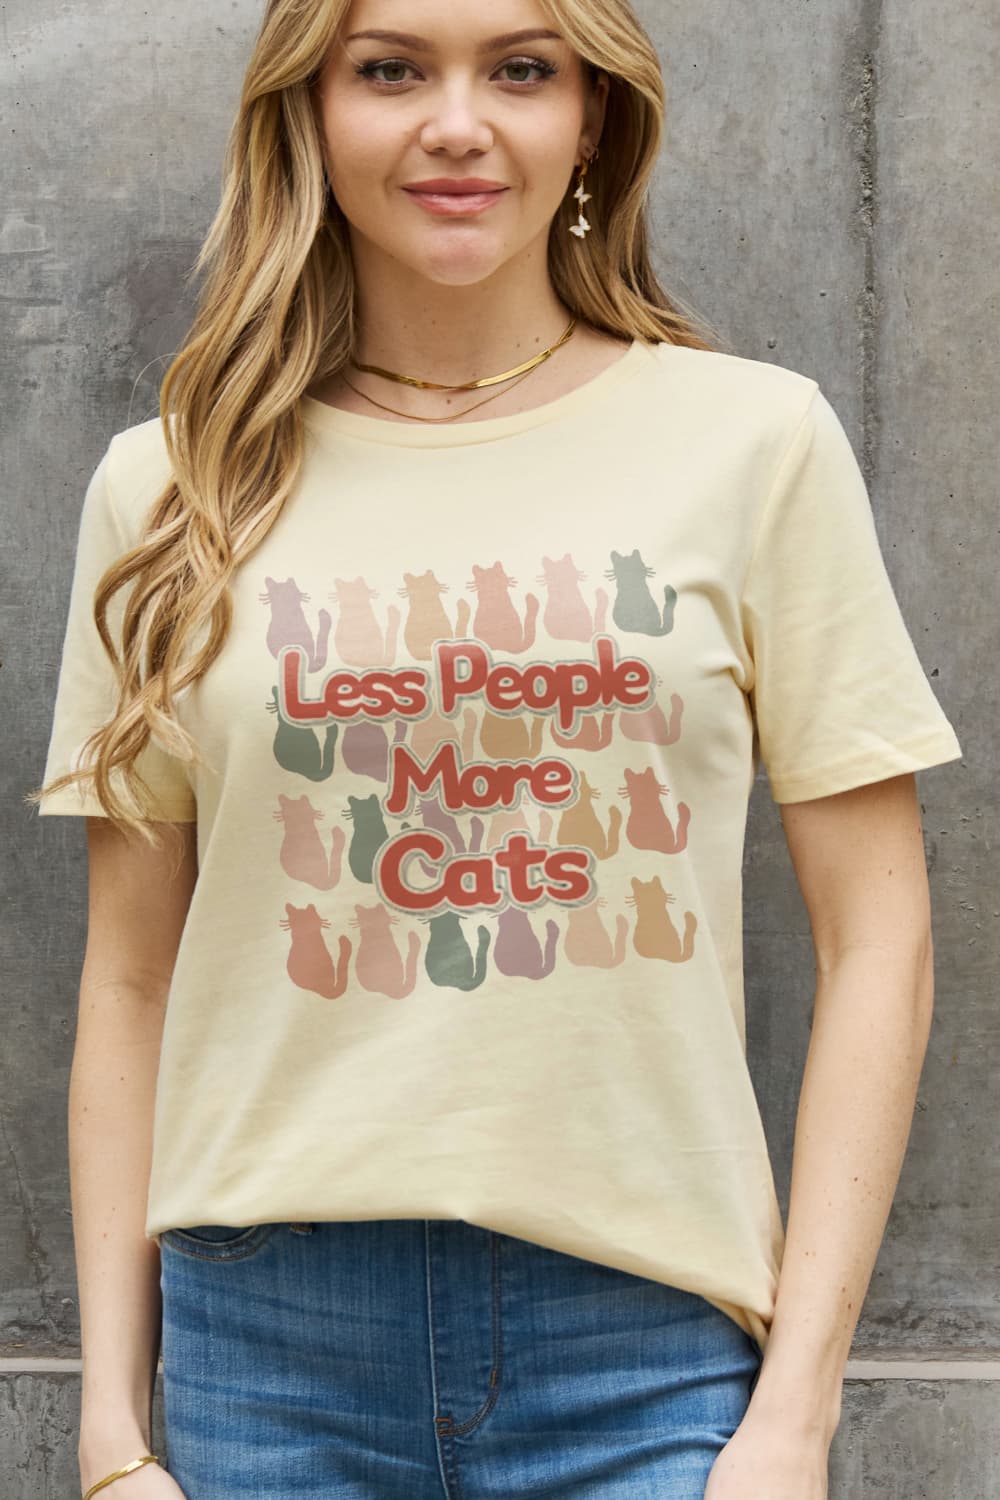 LESS PEOPLE MORE CATS Graphic Cotton Tee - Light Yellow / S - T-Shirts - Shirts & Tops - 13 - 2024